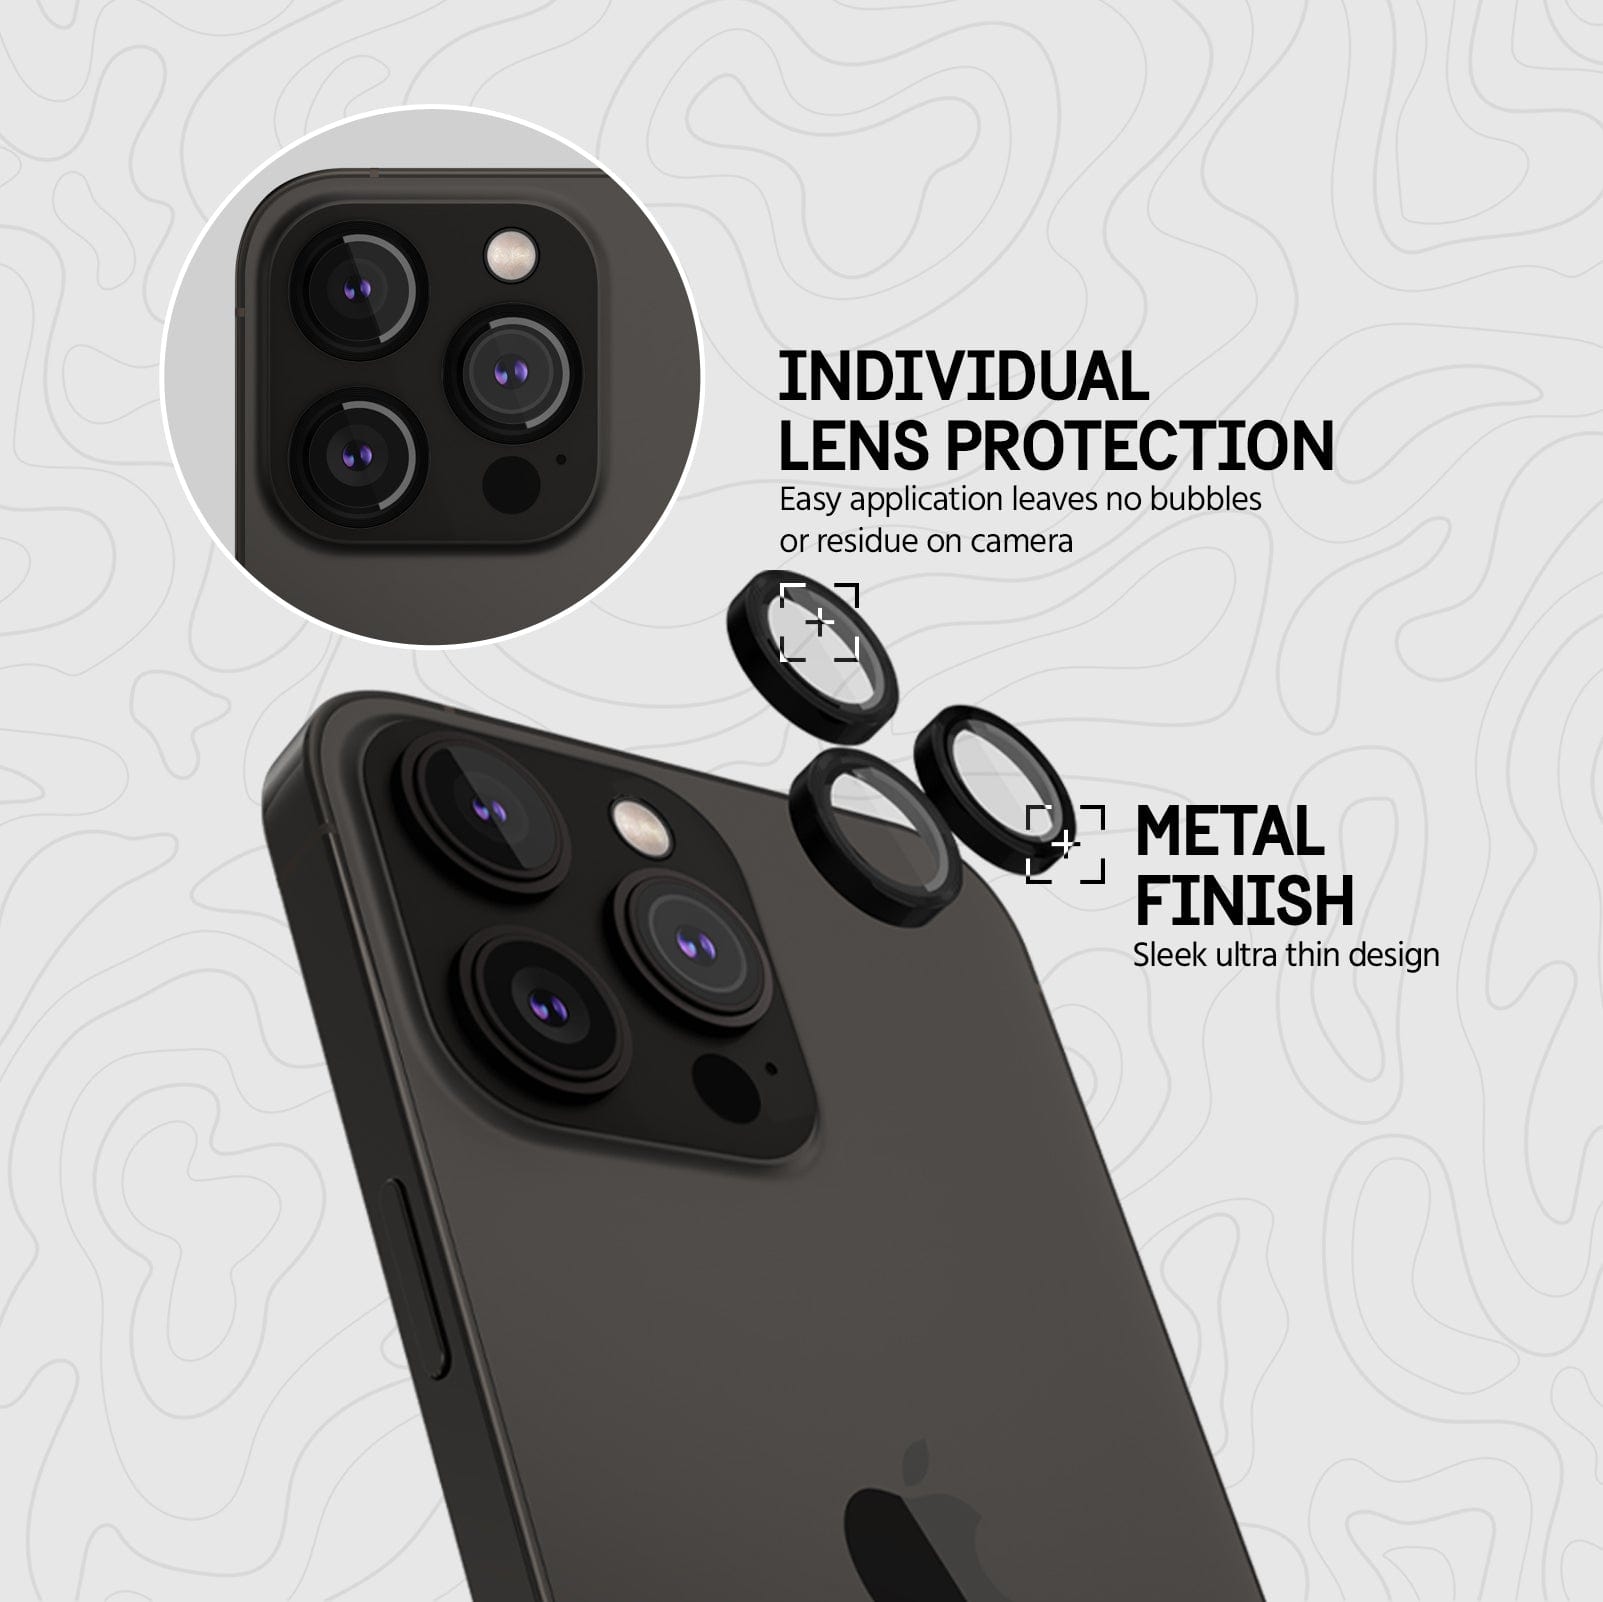 INDIVIDUAL LENS PROTECTION. EASY APPLICATION LEAVES NO BUBBLES OR RESIDUE ON CAMERA. METAL FINISH - SLEEK ULTRA THIN DESIGN 